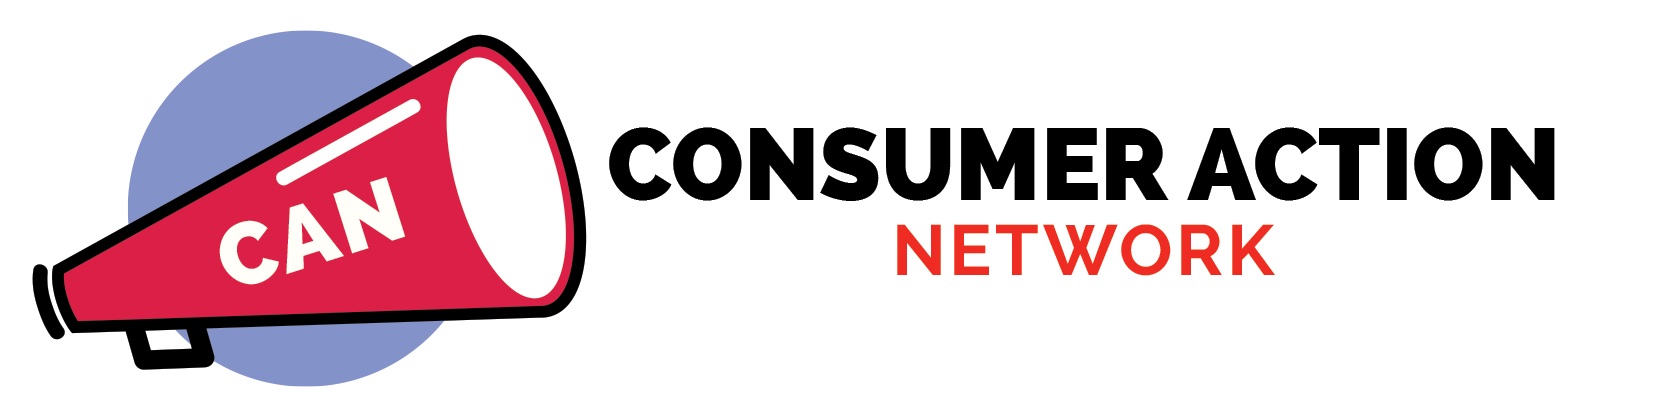 Consumer Action Network